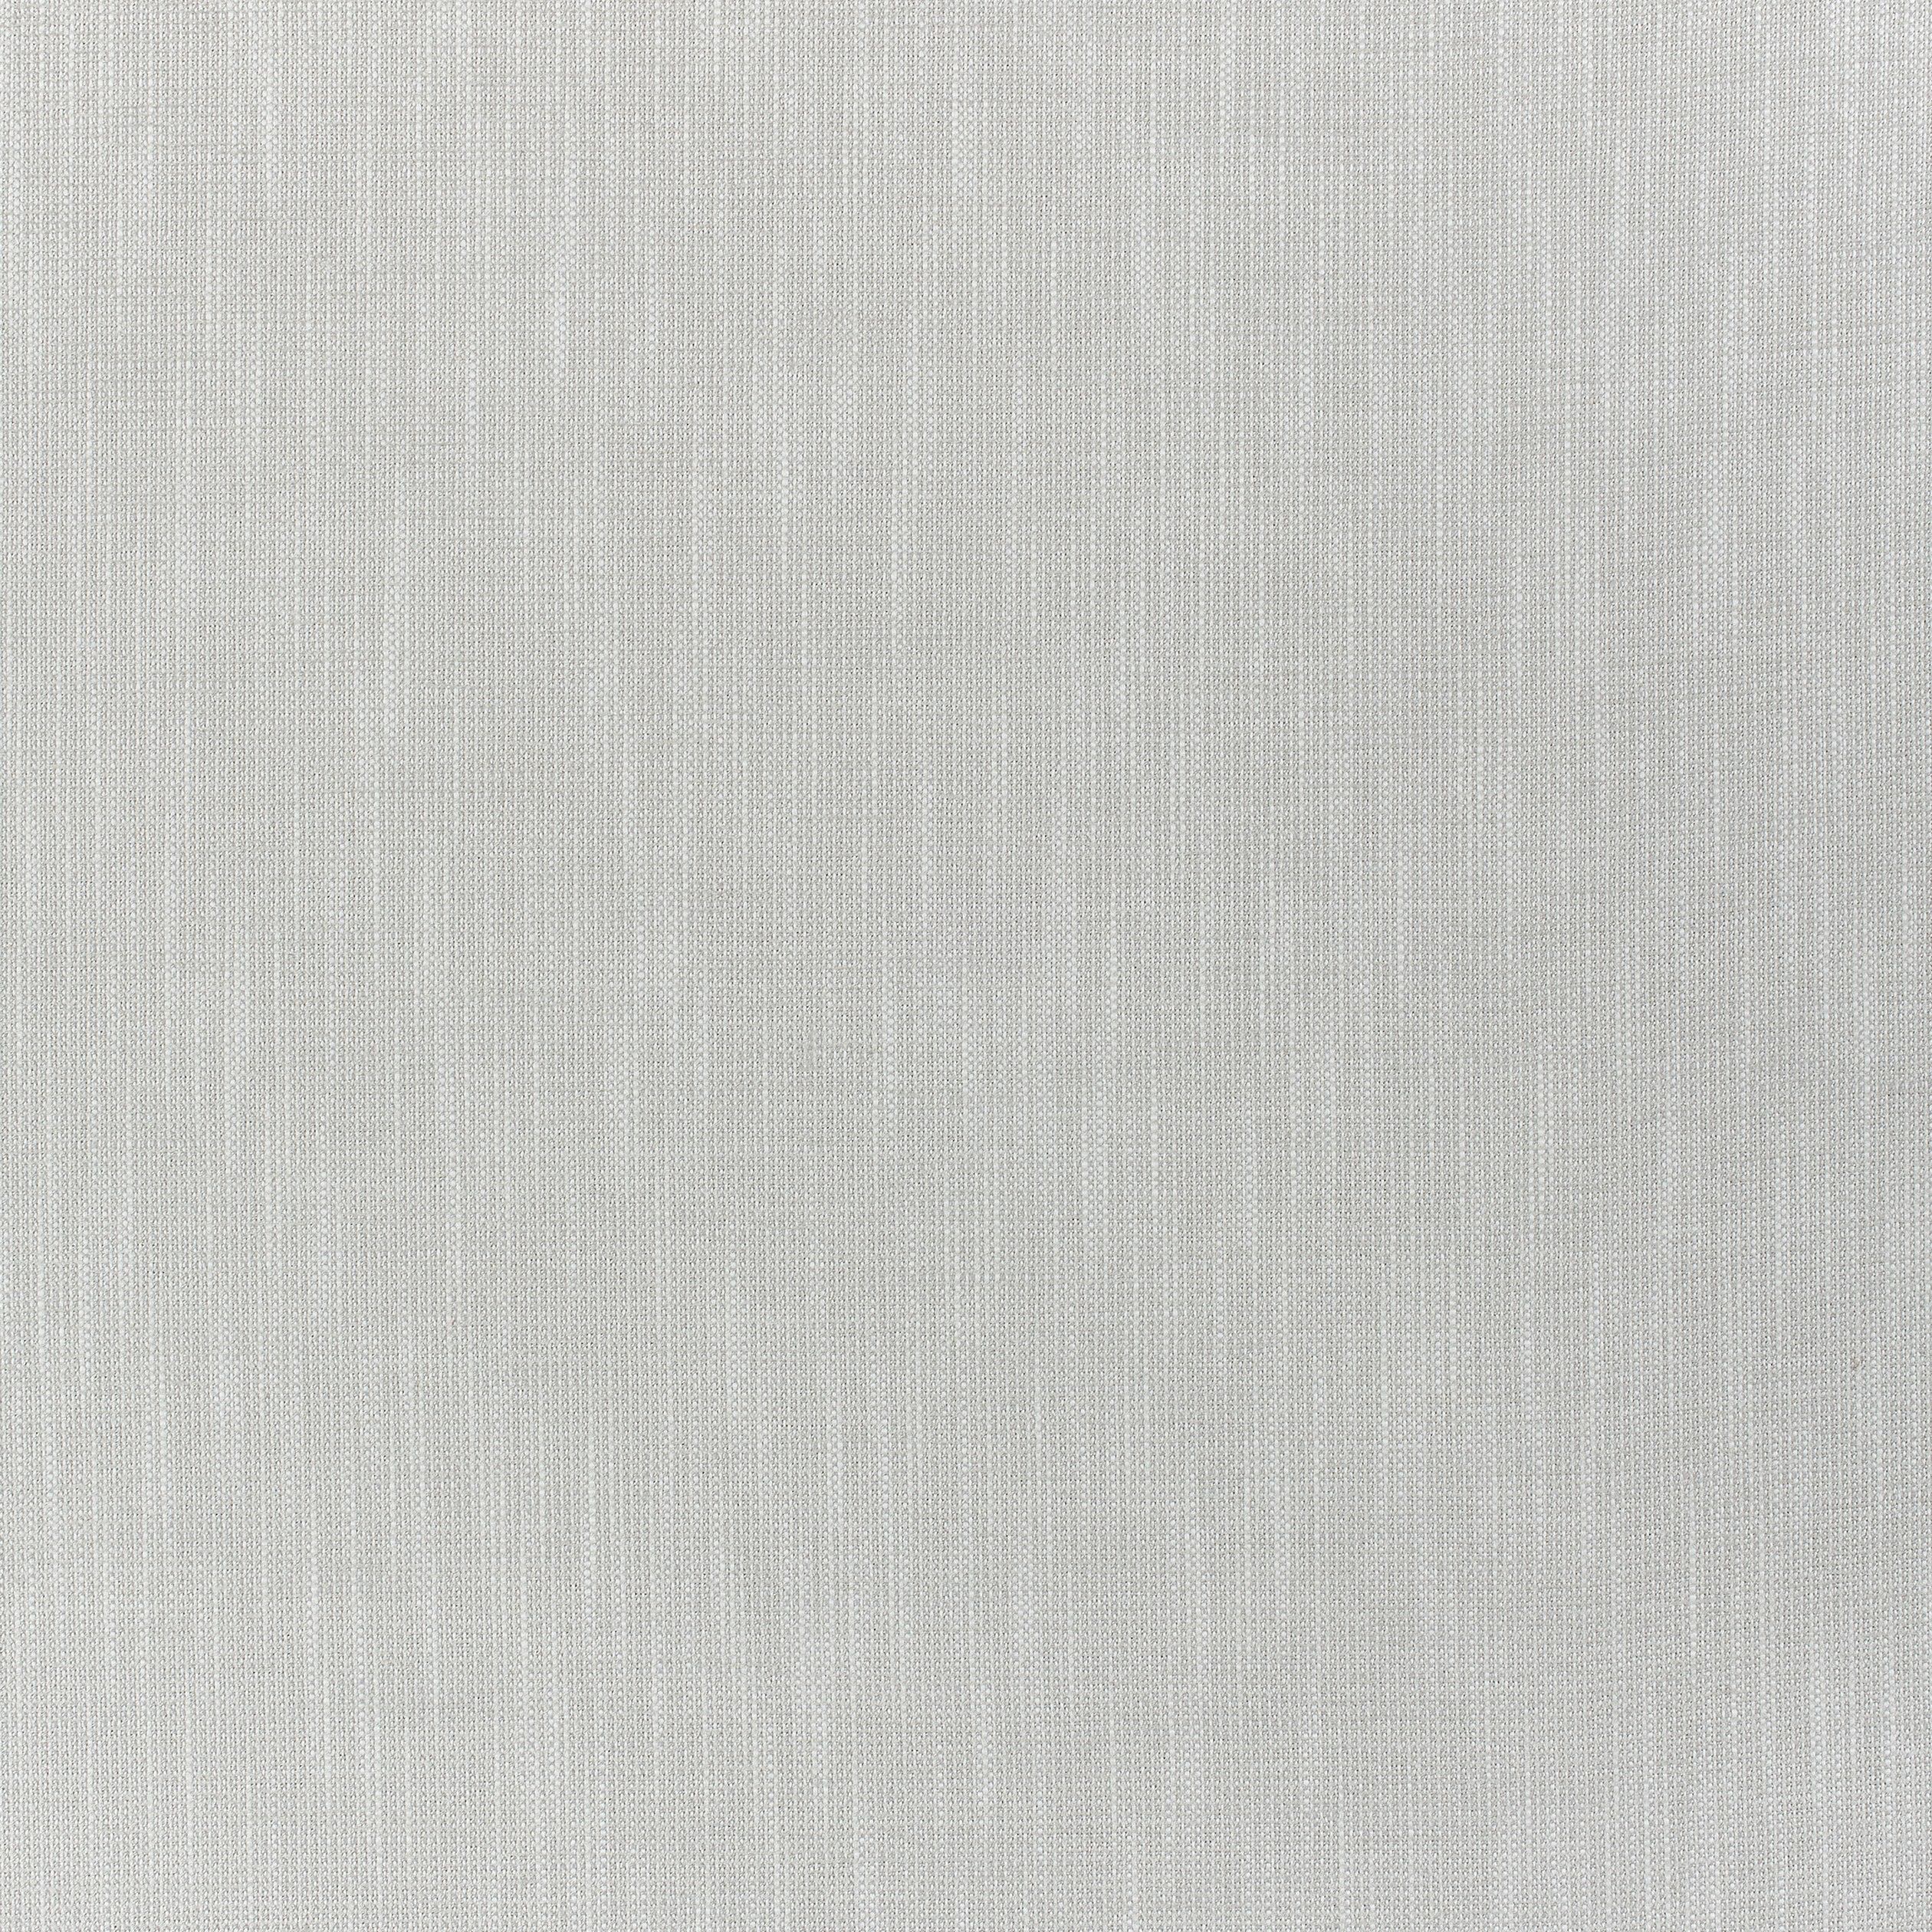 Bailey fabric in sterling grey color - pattern number W80494 - by Thibaut in the Mosaic collection